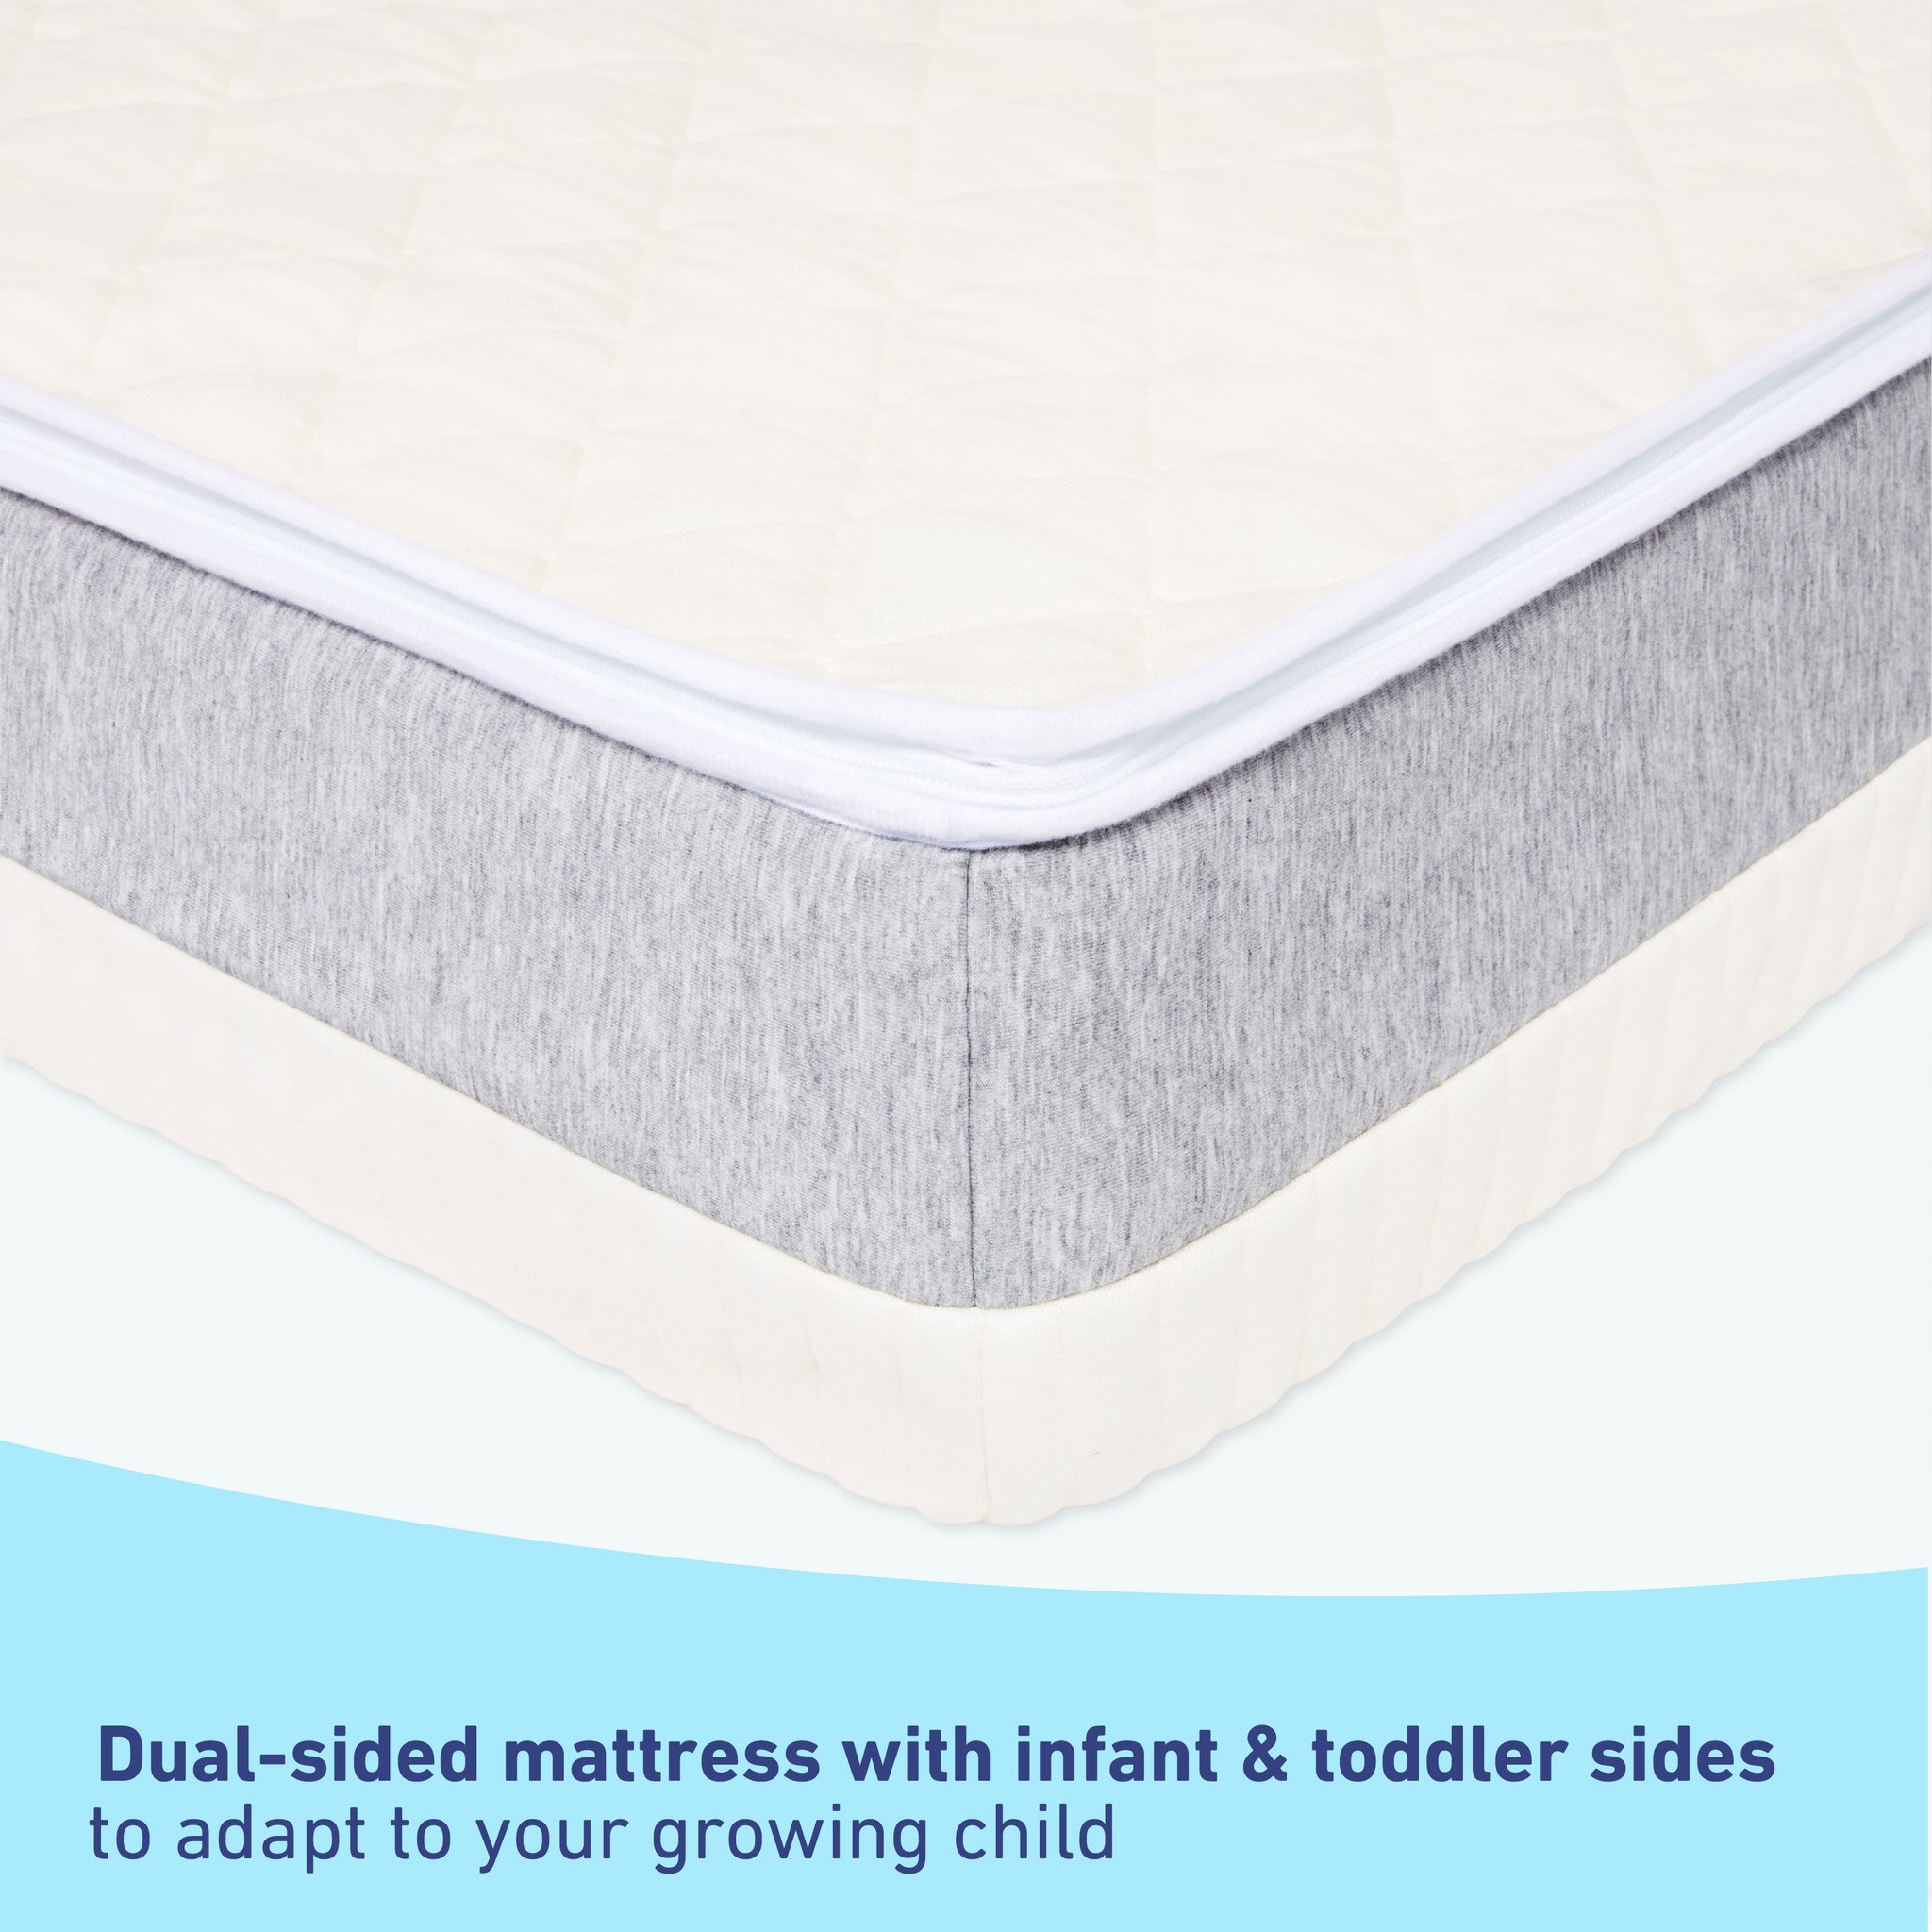 Close-up view of baby mattress cover